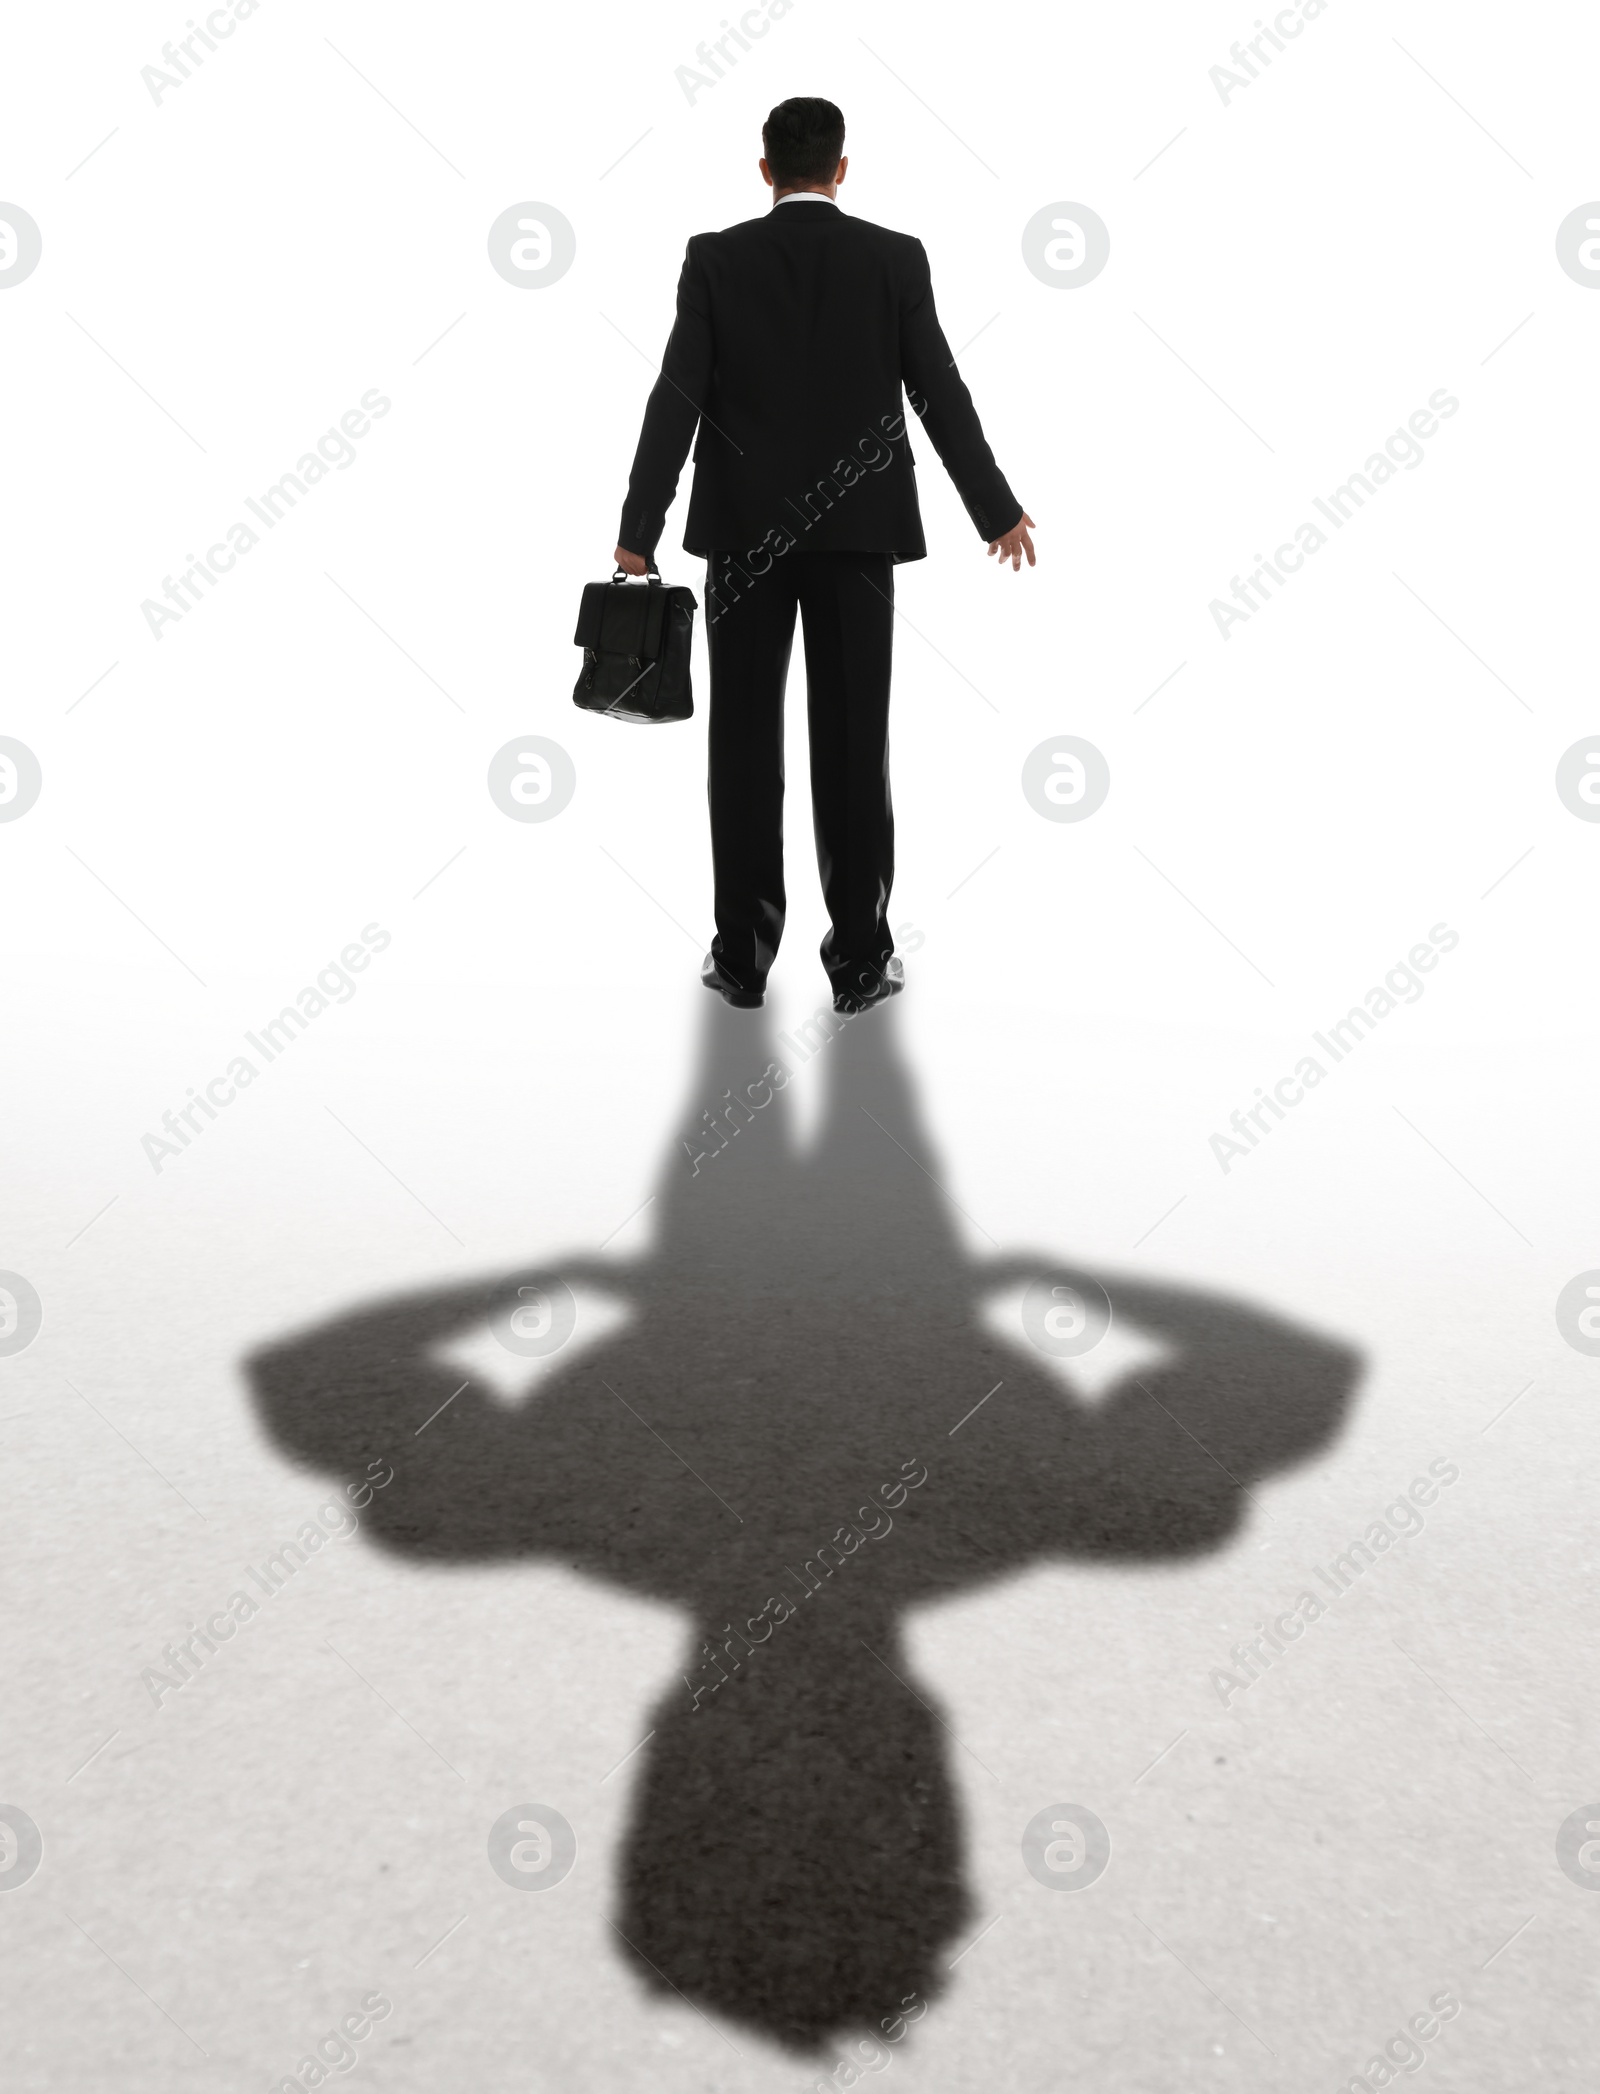 Image of Businessman and shadow of strong muscular man behind him on white background. Concept of inner strength